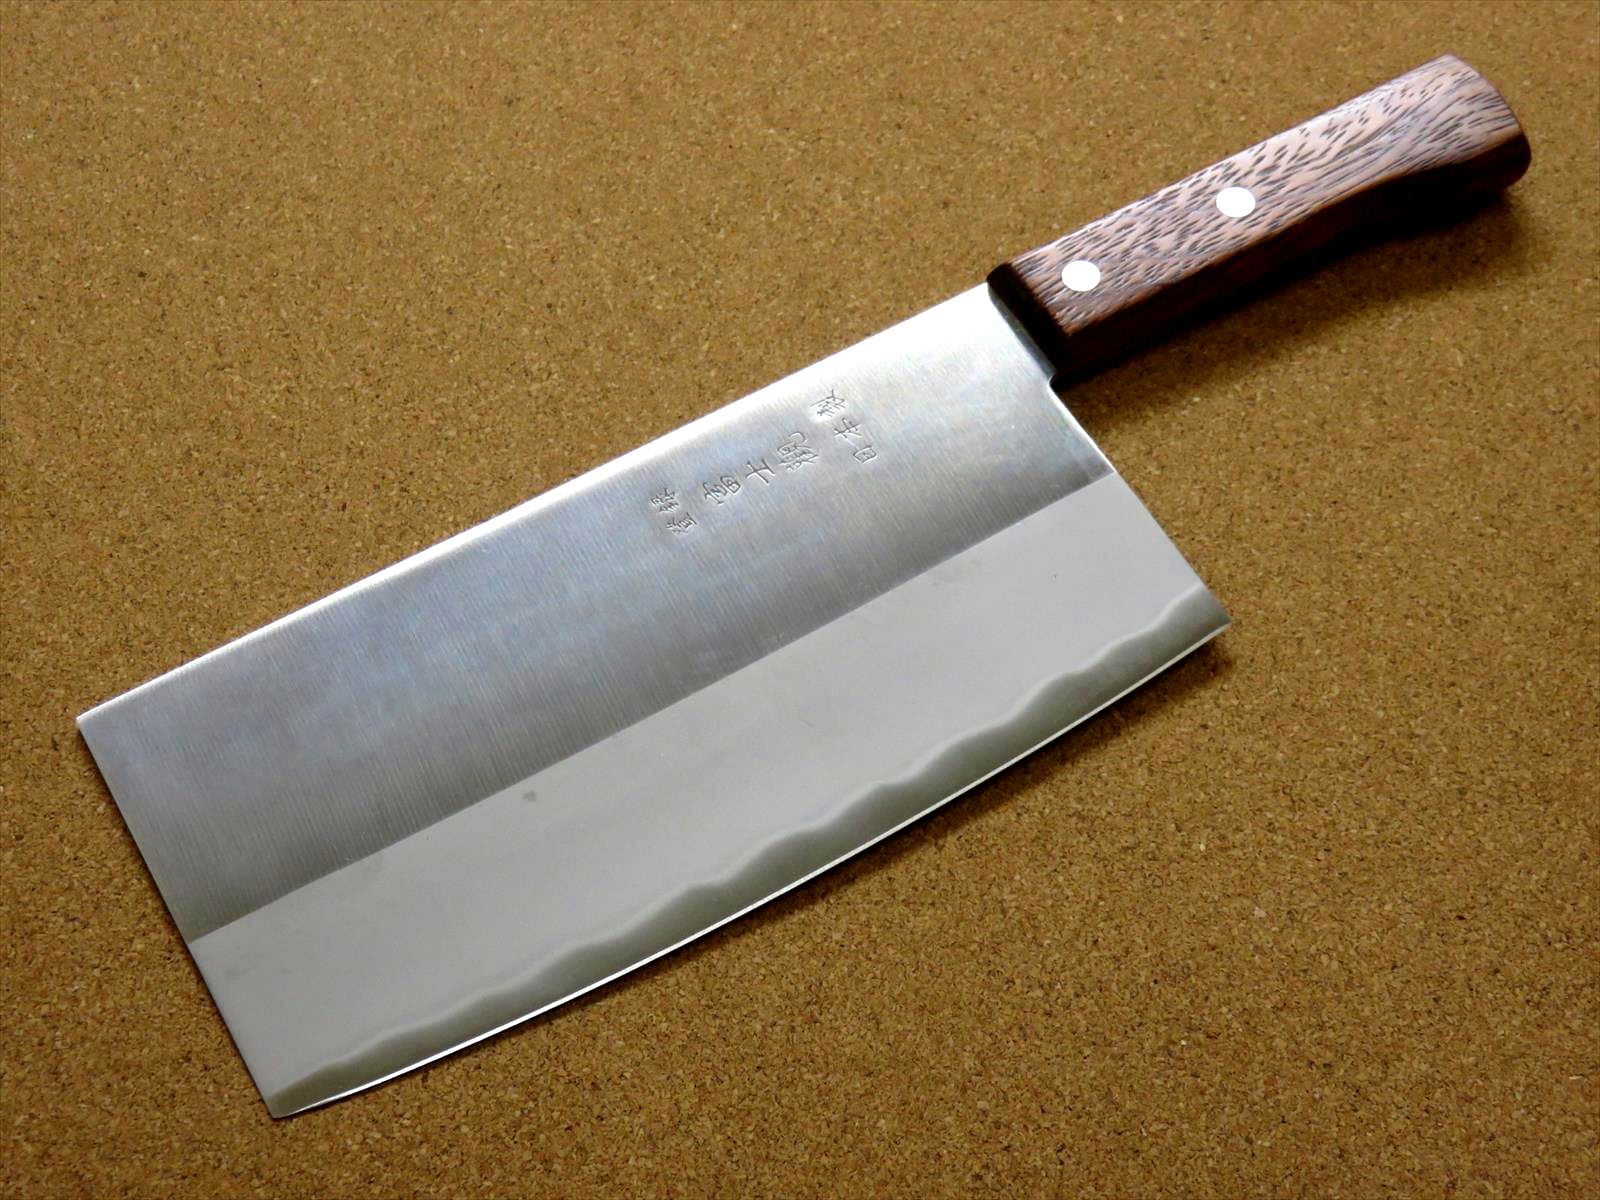 Crude Premium Chinese Cleaver Vegetable Chef Knife, 8 Inch Narrow Carbon  Steel -  Hong Kong